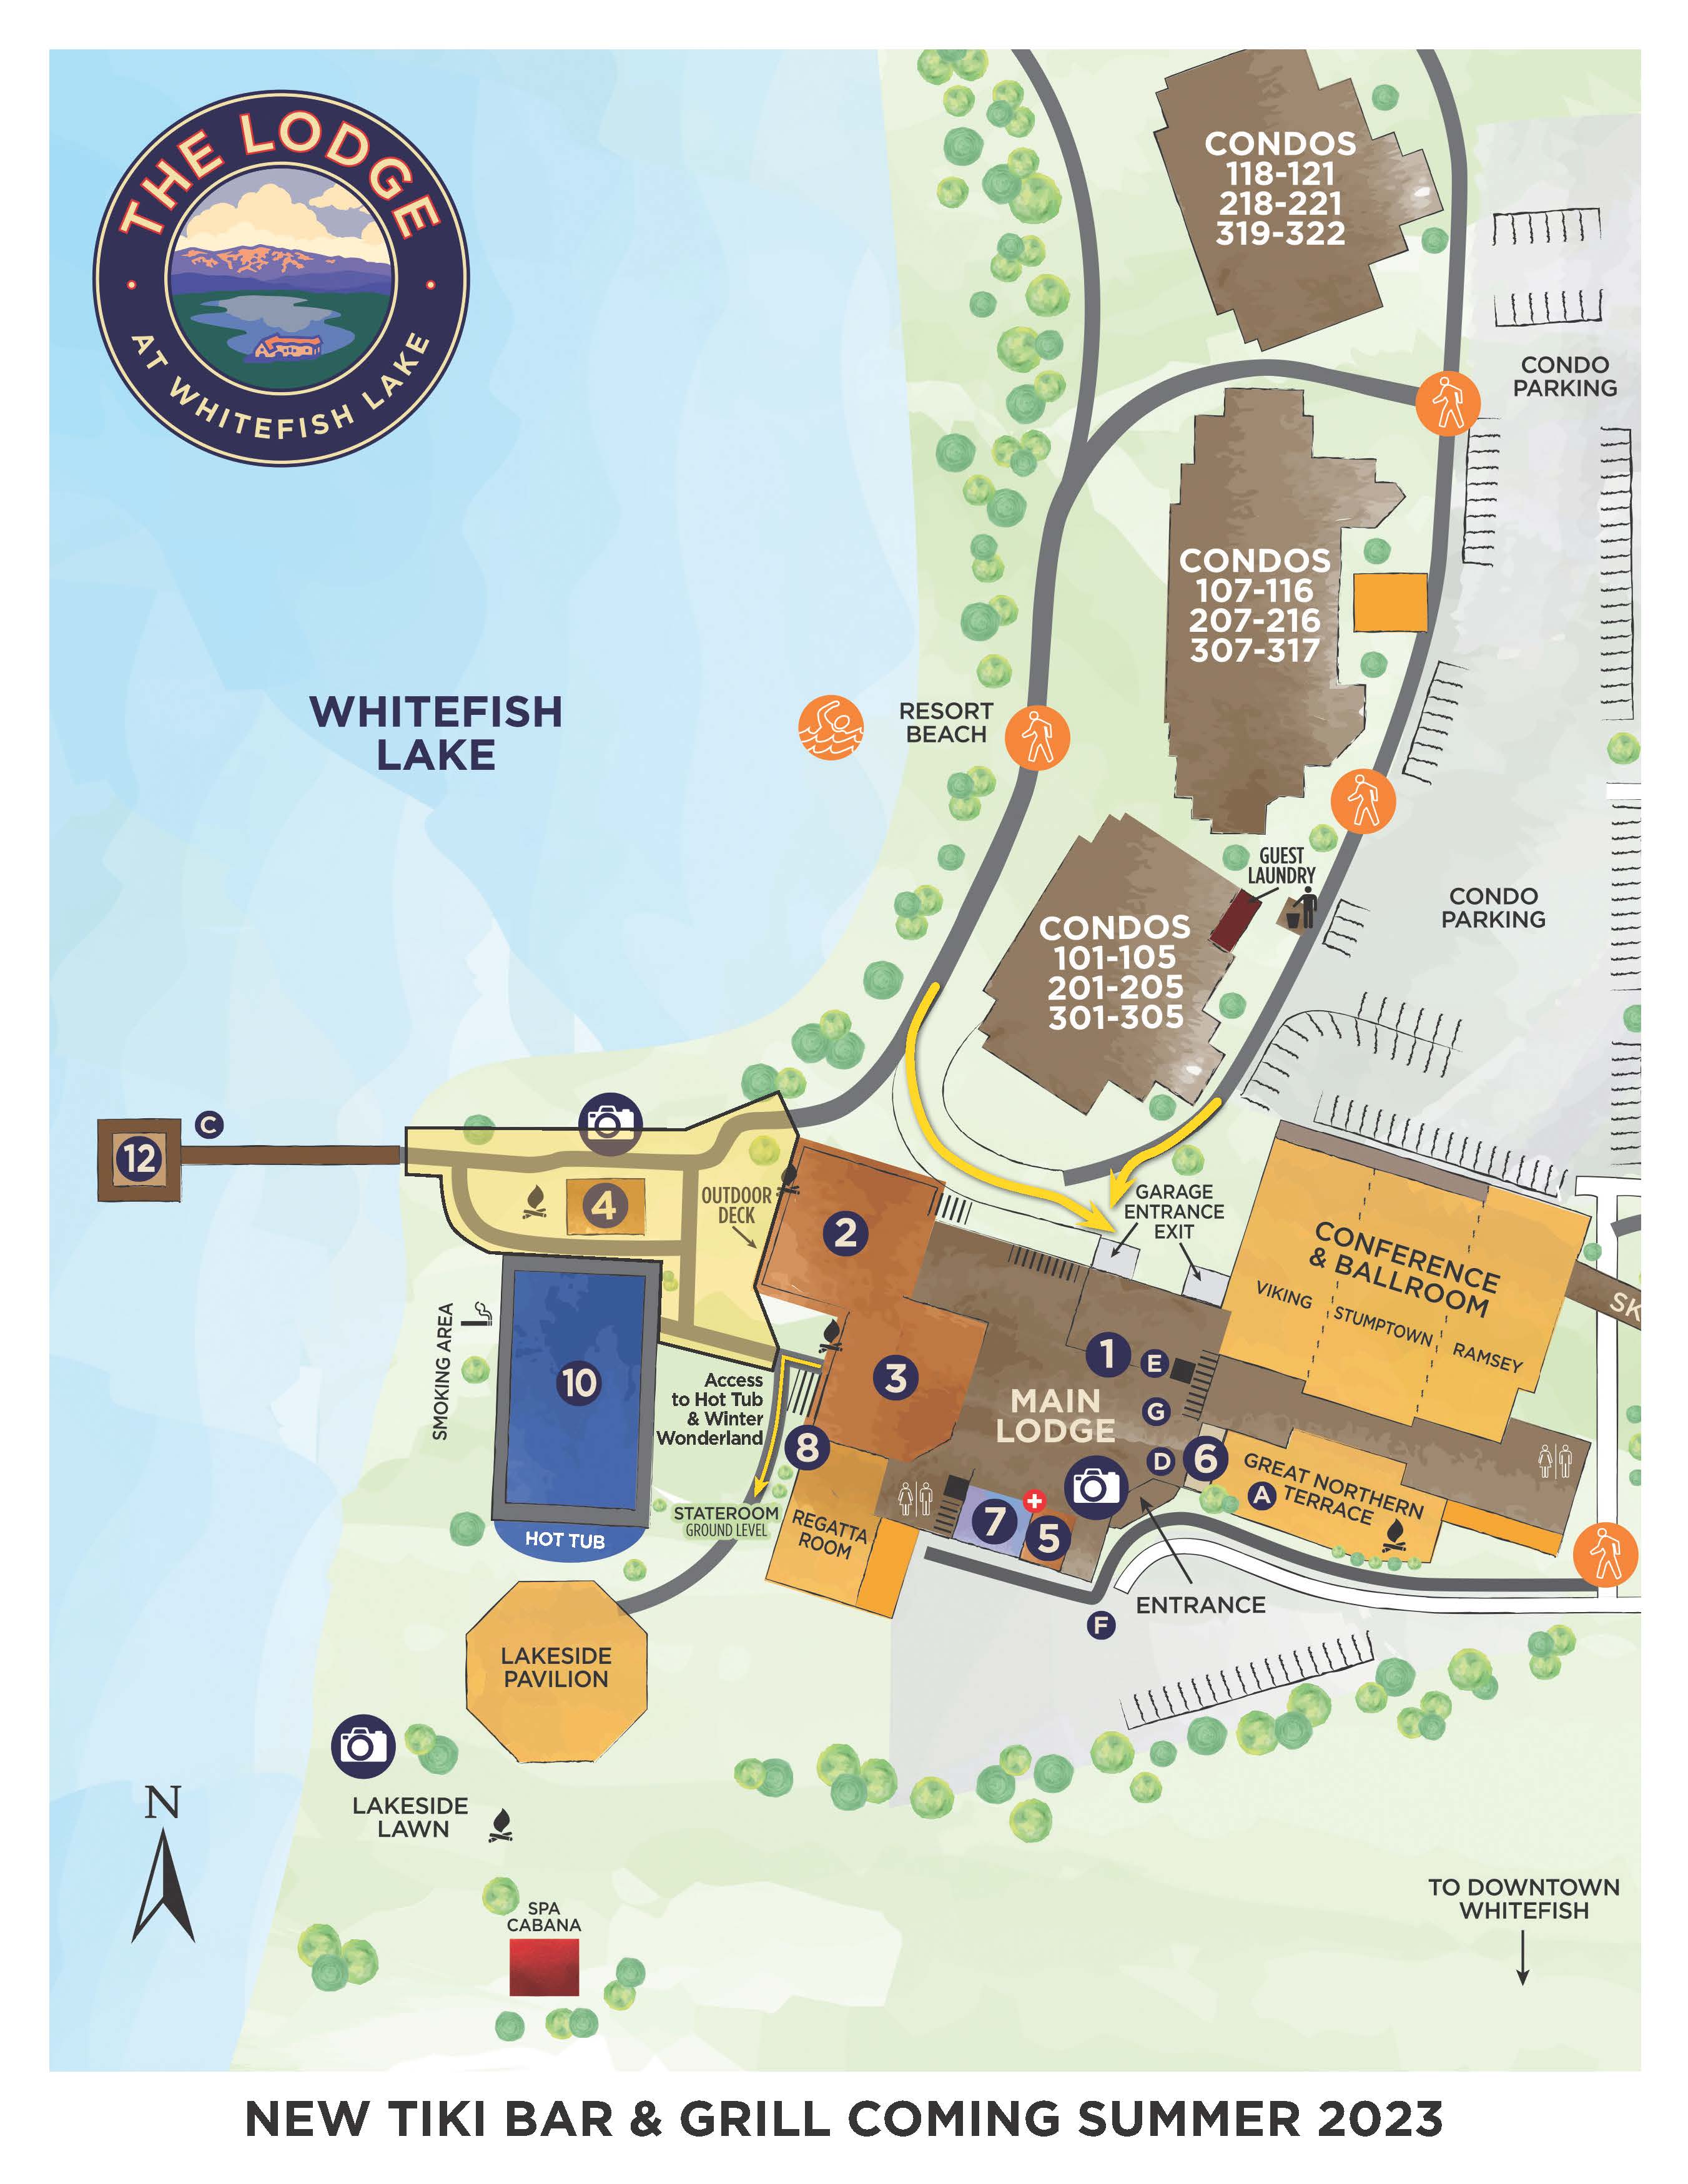 Property Map showing Tiki Bar closure area and reroute to the lakefront hot tub and south lawn.